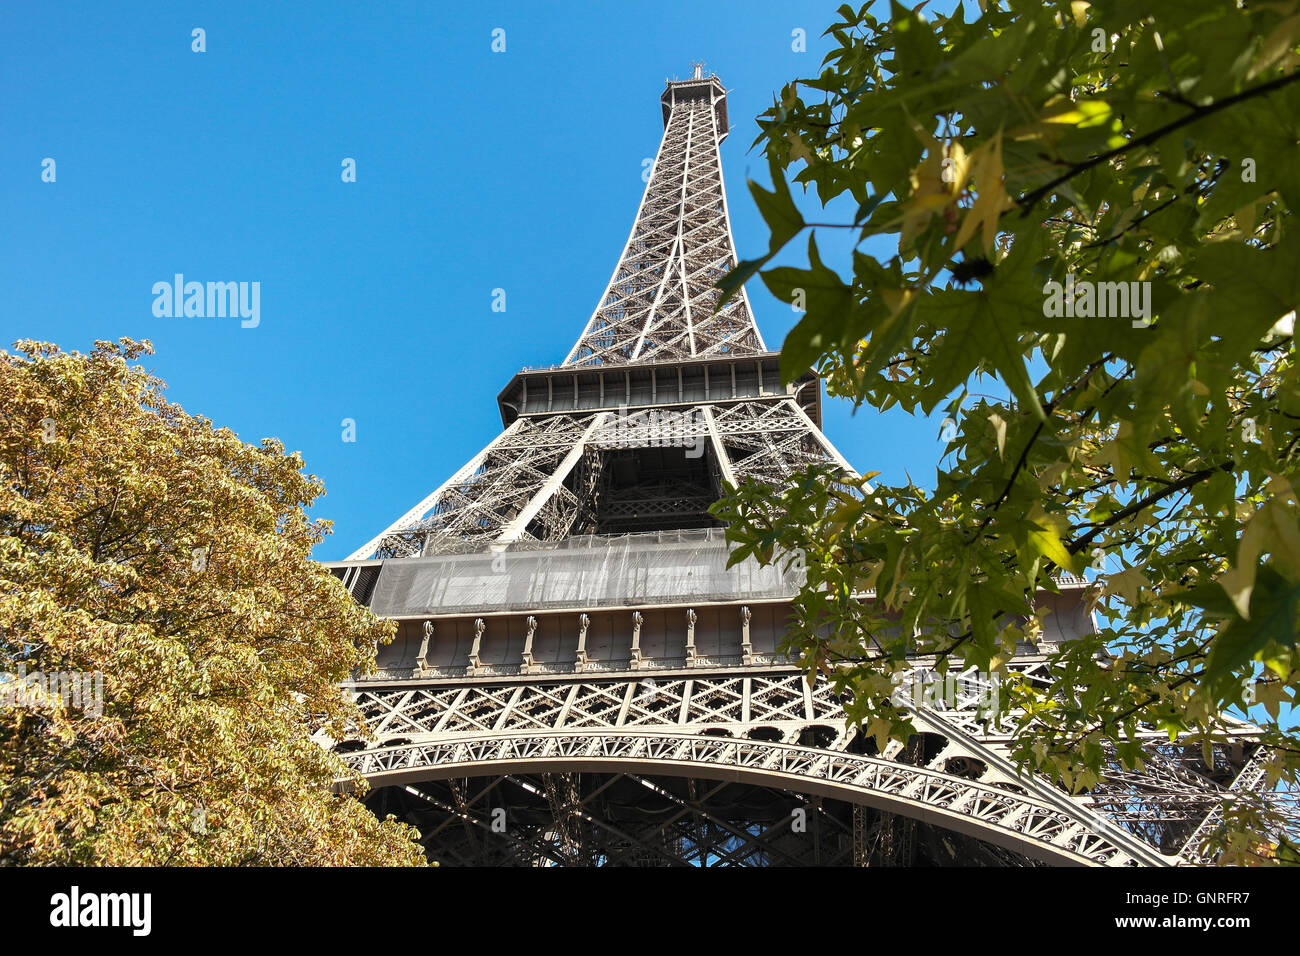 The famous Eiffel tower in Paris, France - Europe Stock Photo